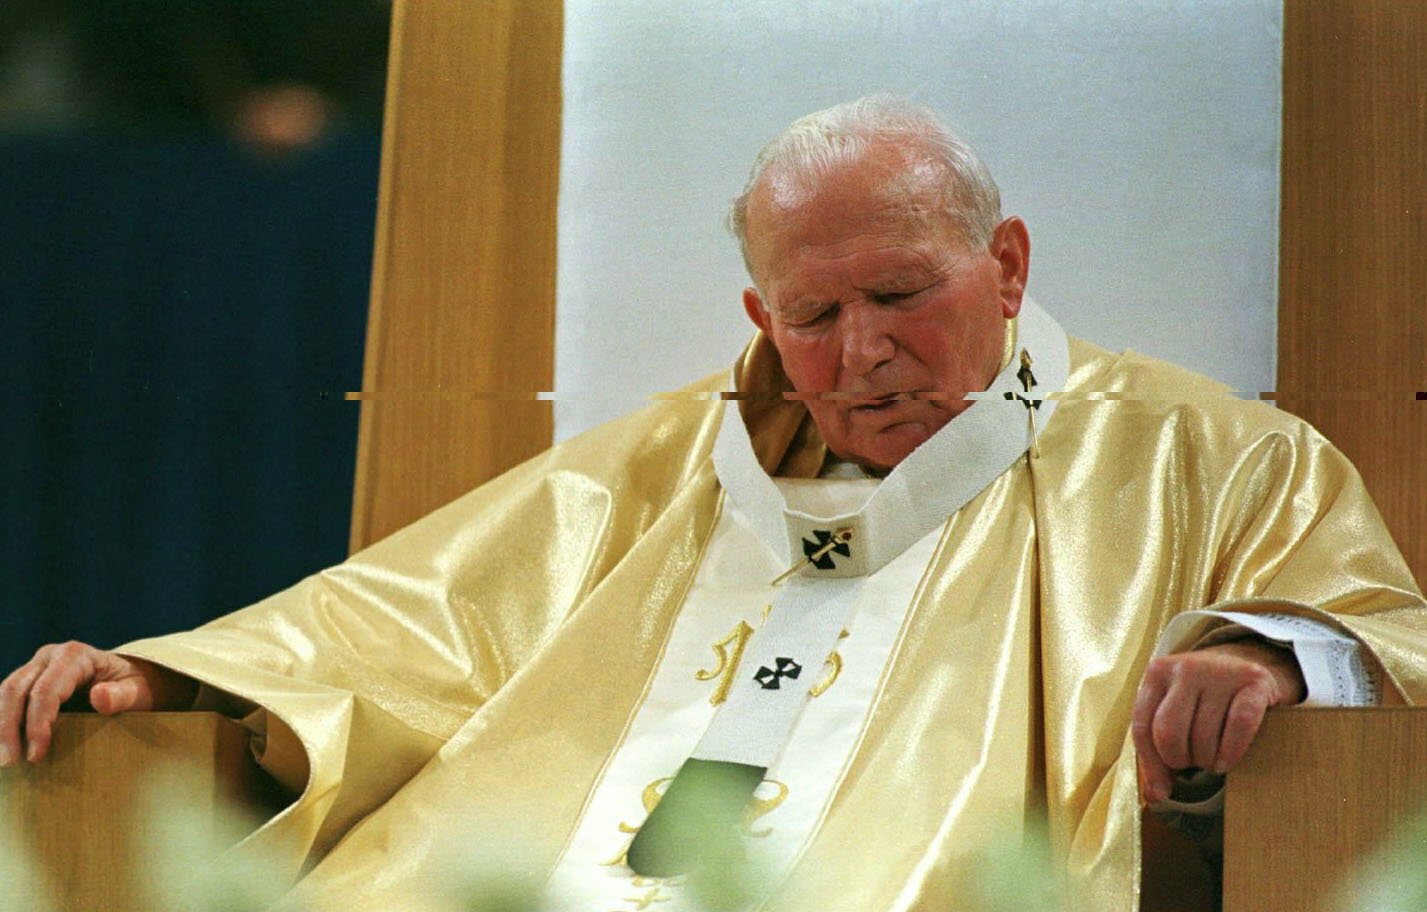 Pope John Paul II sits during Mass at the Trans World Dome in St. Louis Jan 27, 1999.